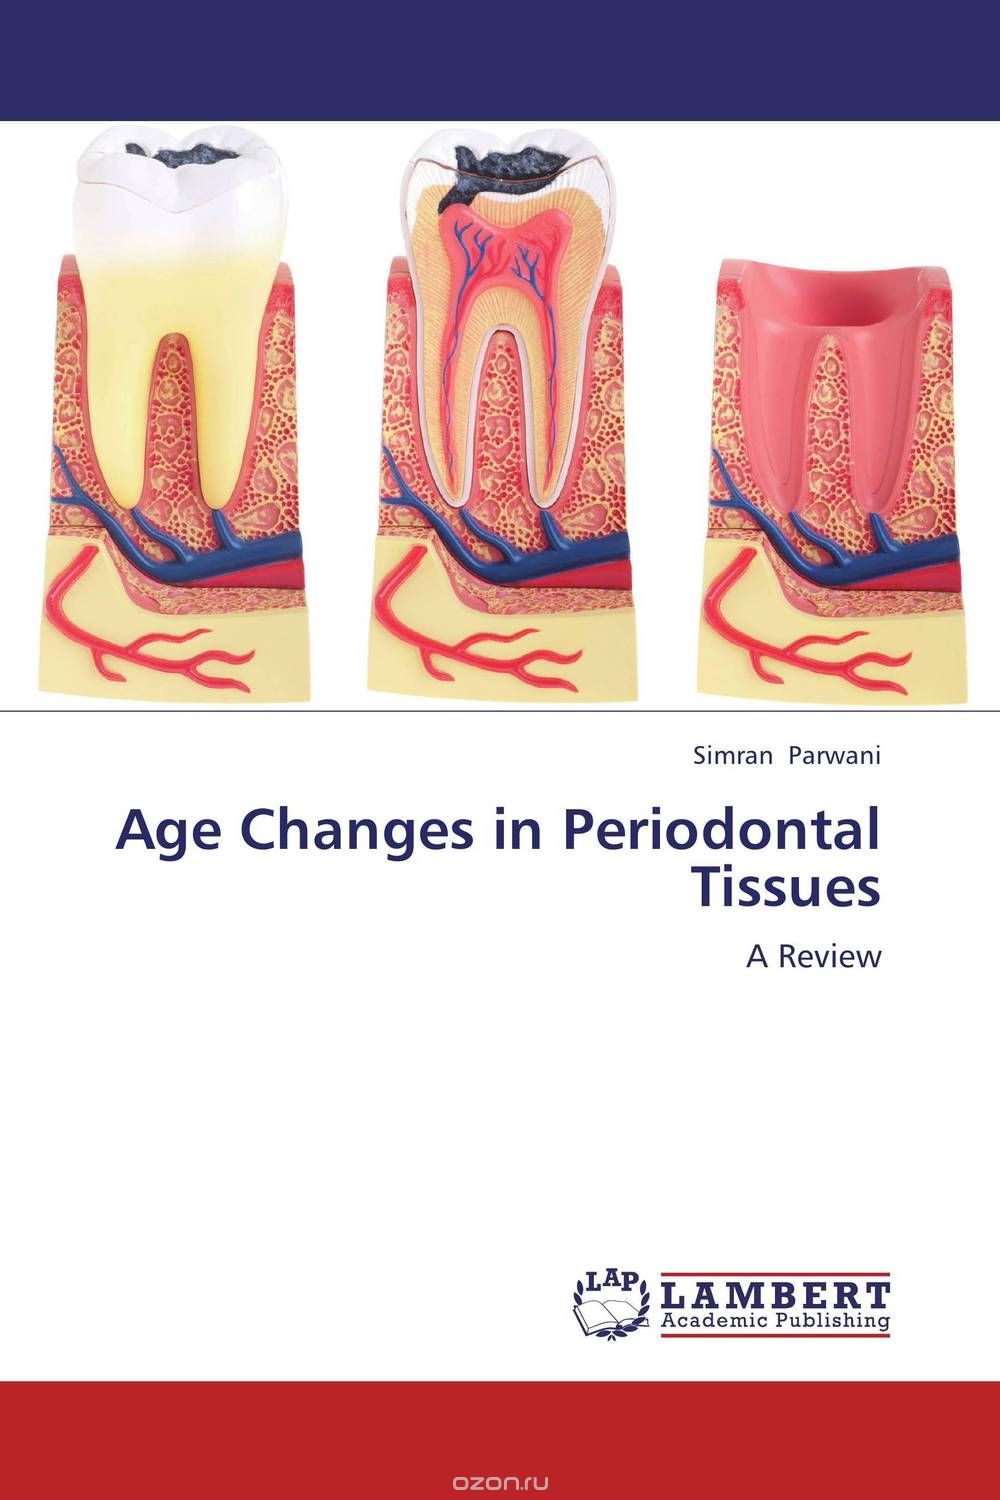 Age Changes in Periodontal Tissues